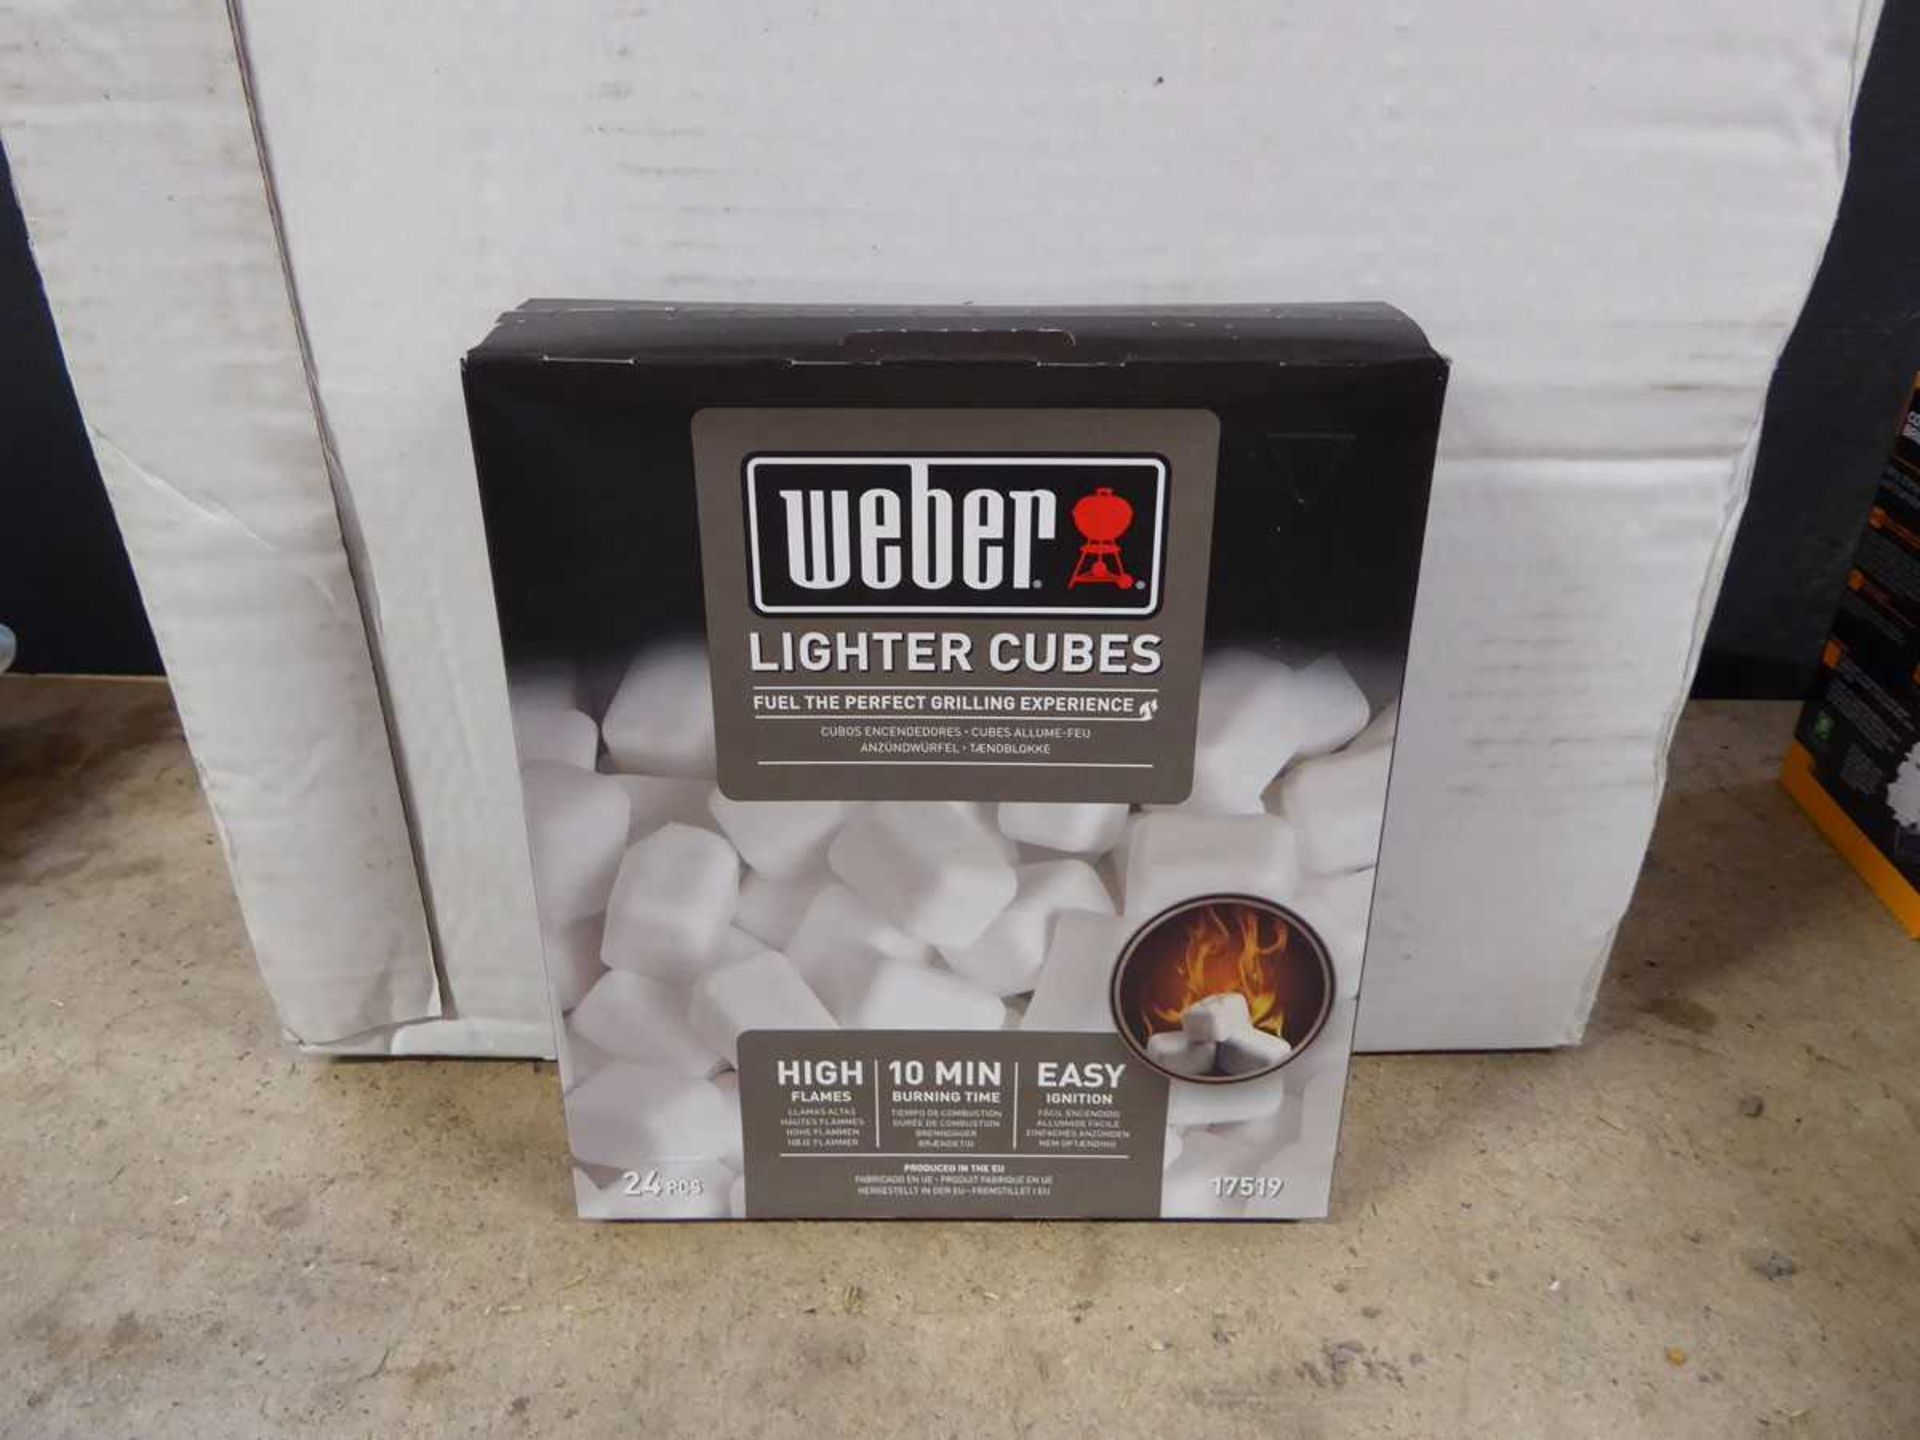 Large quantity of Weber lighter cubes - Image 2 of 2